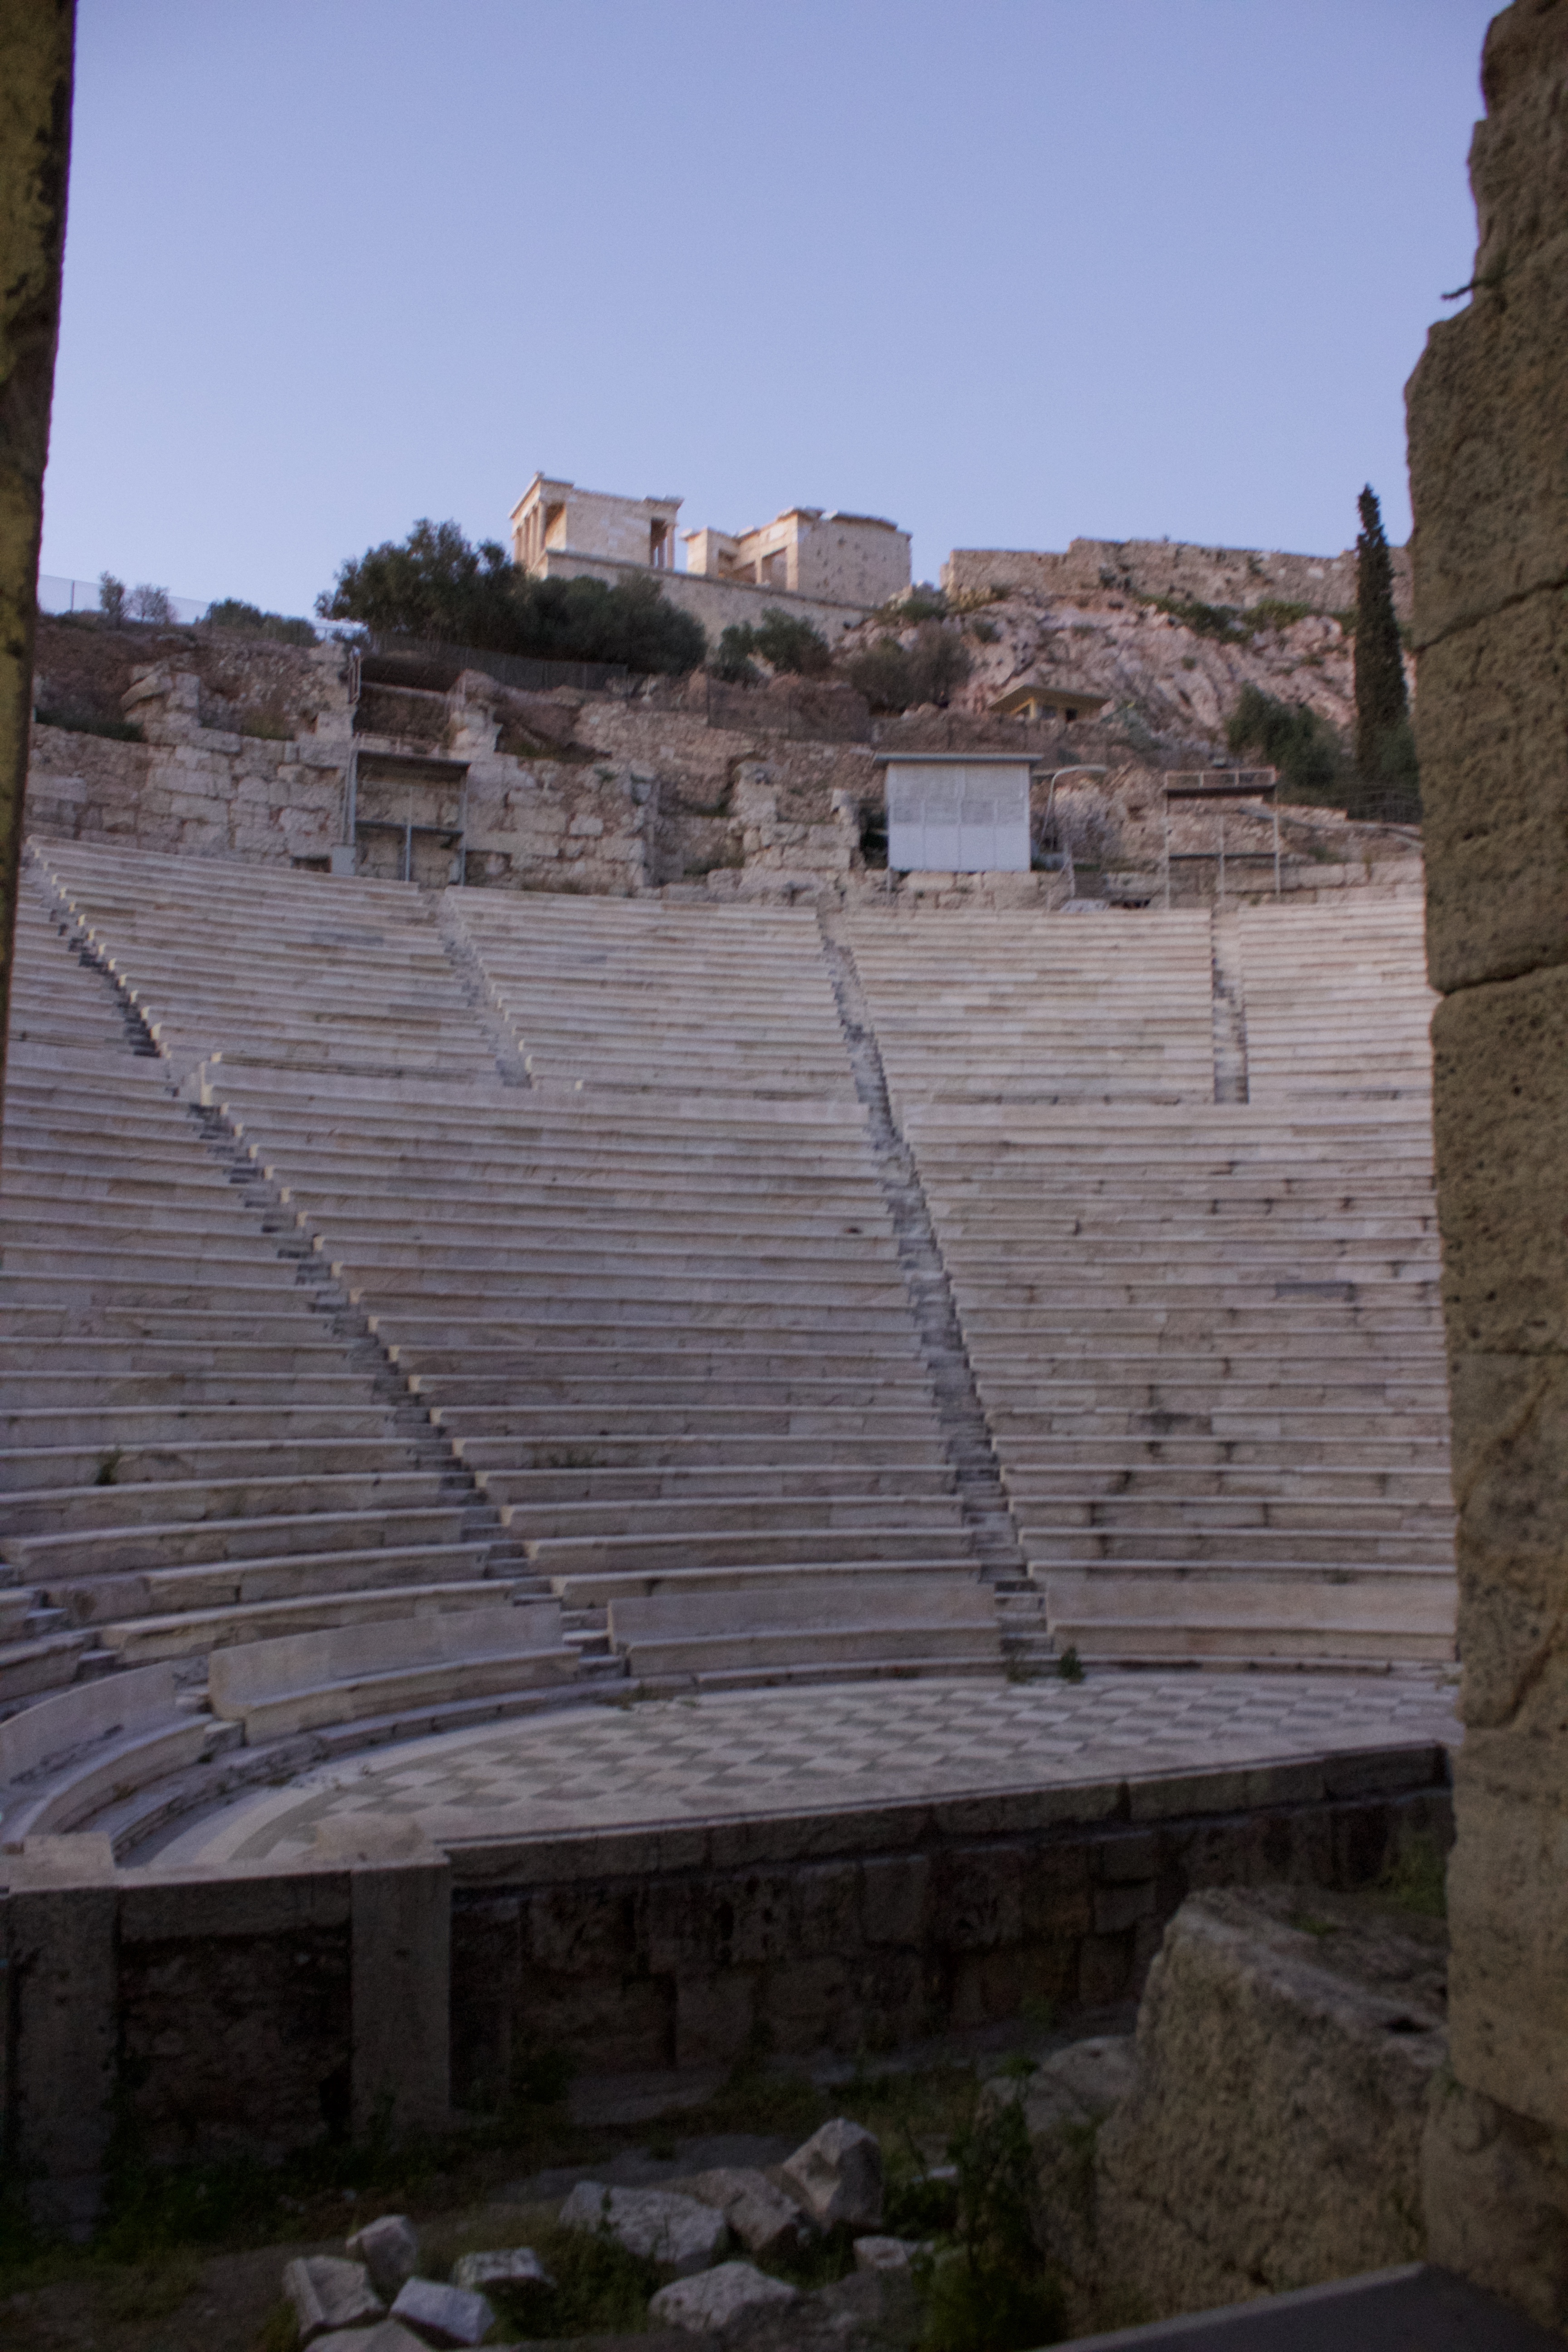 An open air theatre close to the Acropolis